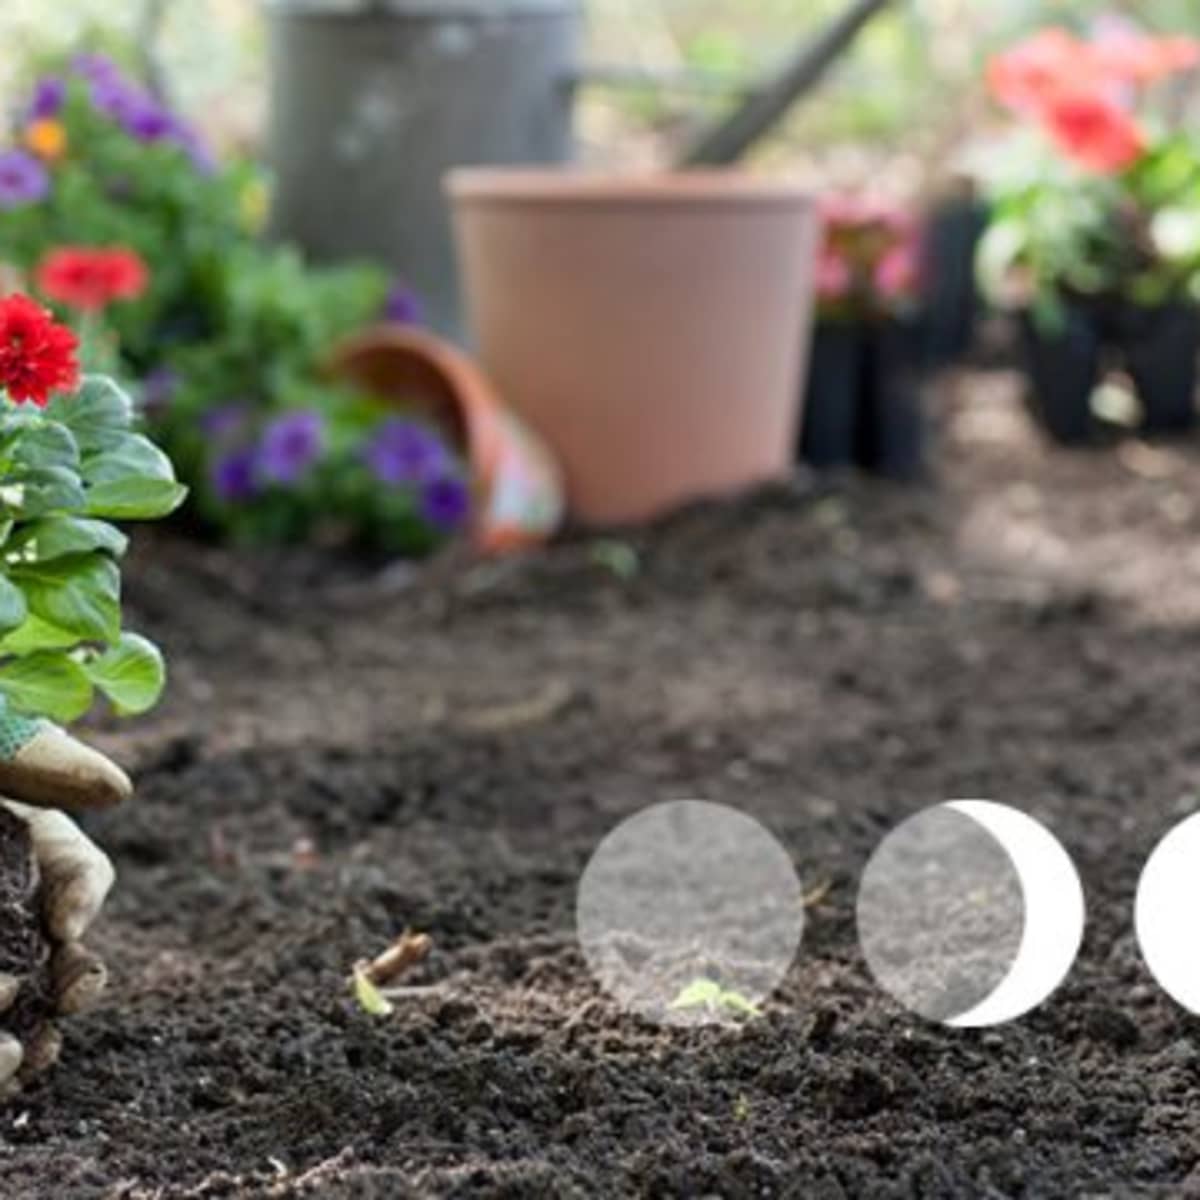 The Science Behind Moon Phase Gardening – Roger's Gardens